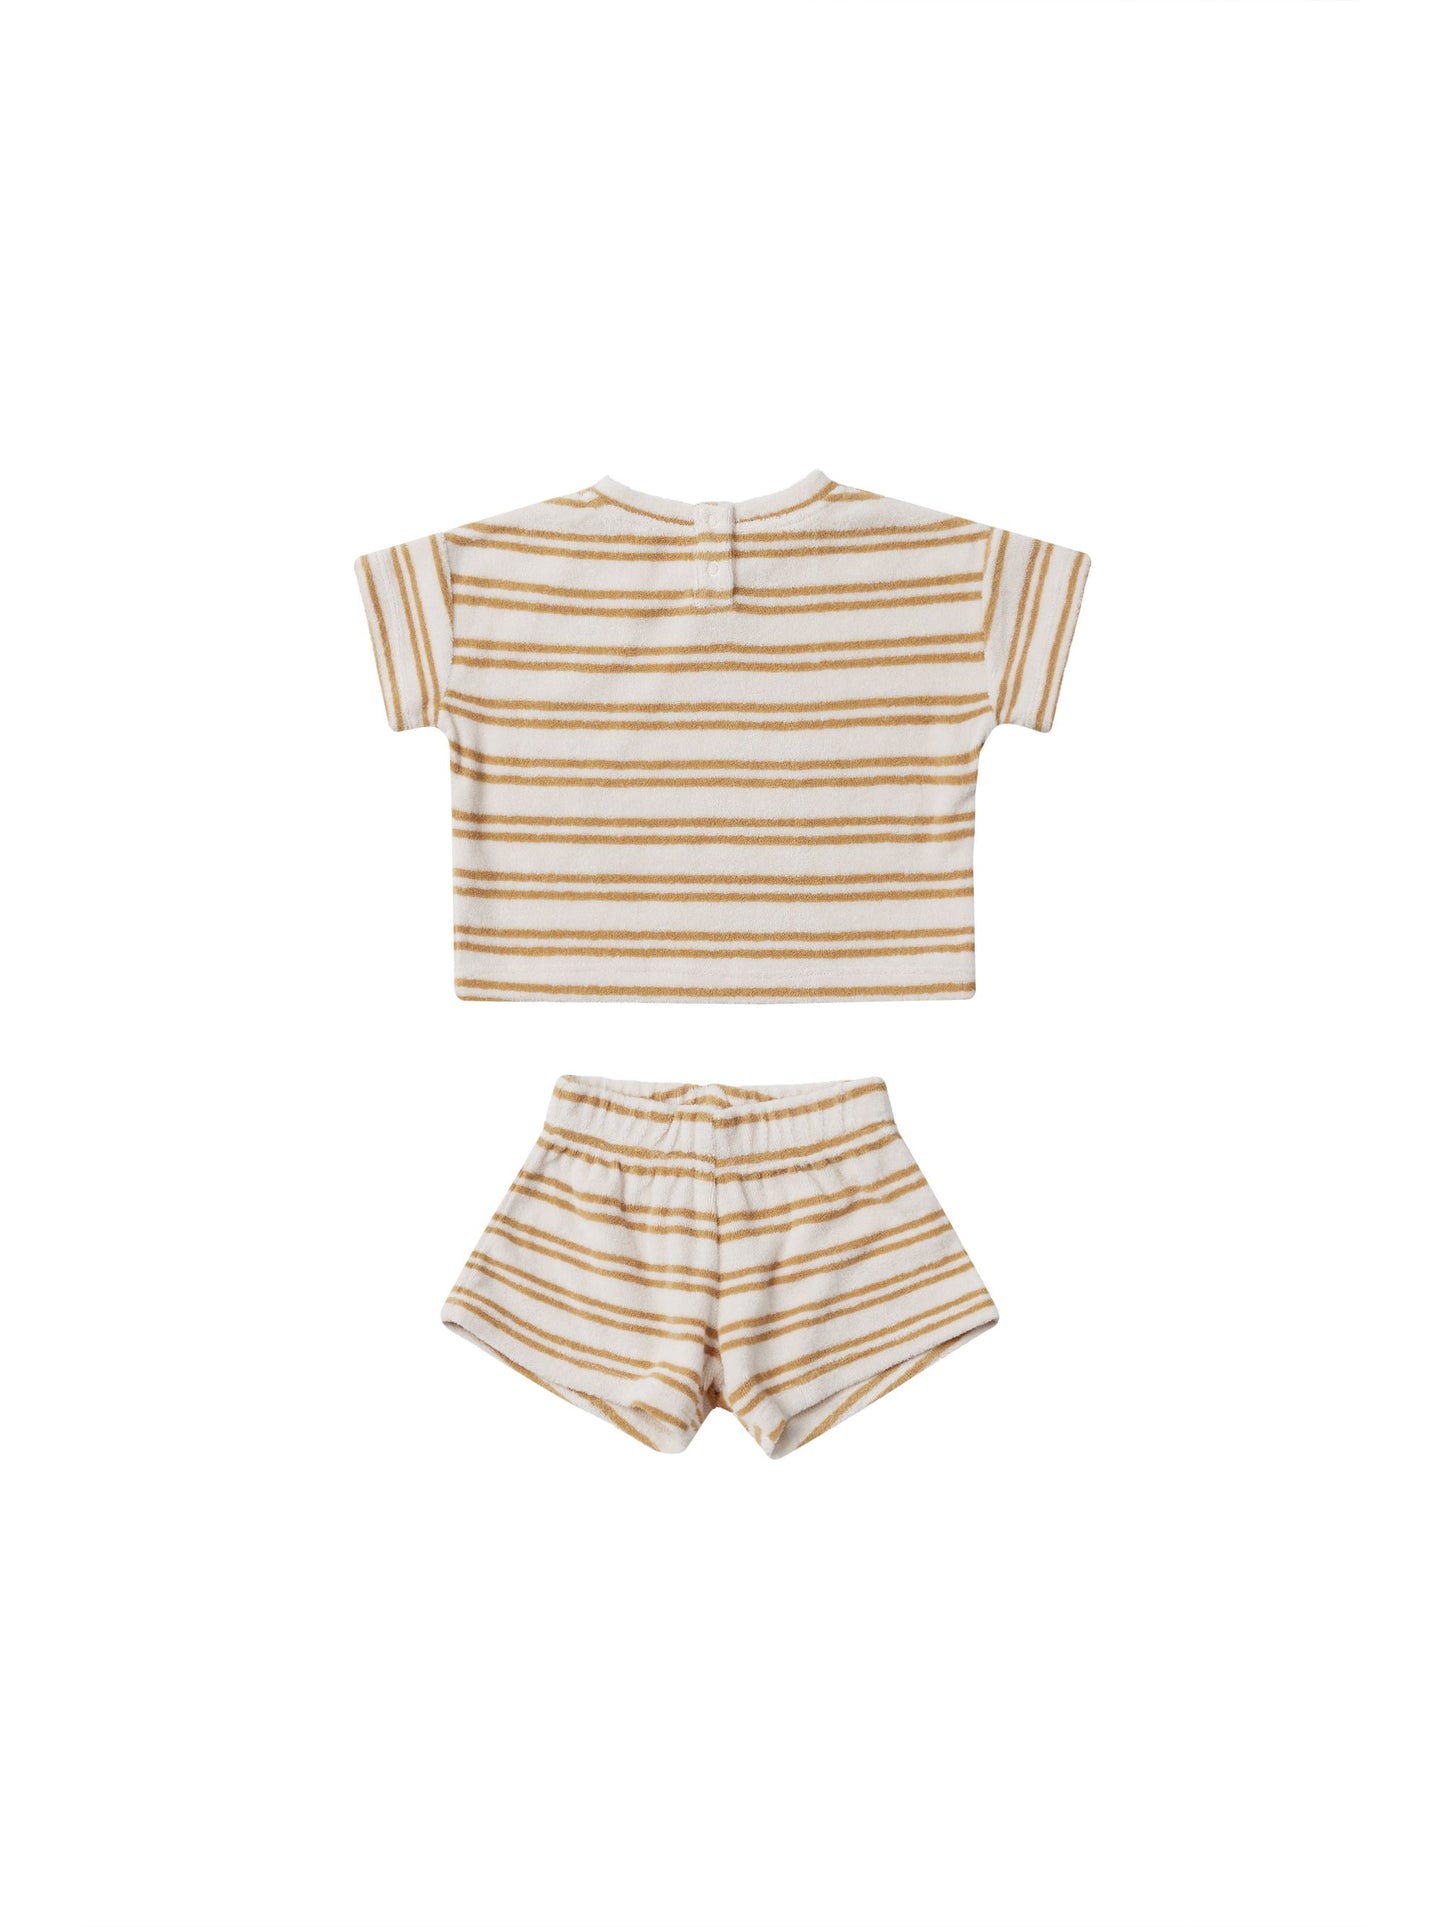 Quincy Mae Terry Tee + Shorts Set in Honey Stripe